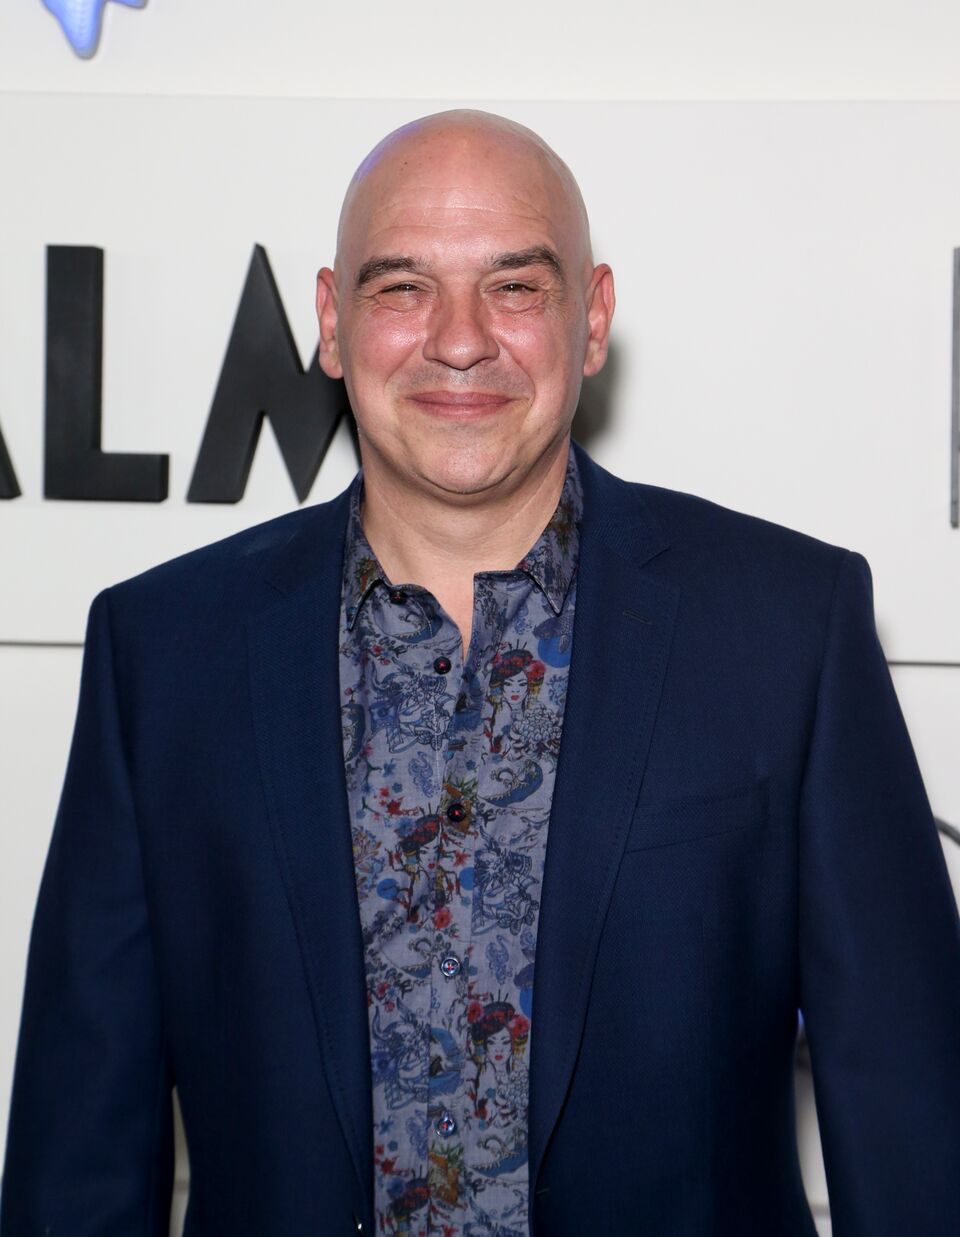 Michael Symon attends the grand opening of KAOS. | Source: Getty Images